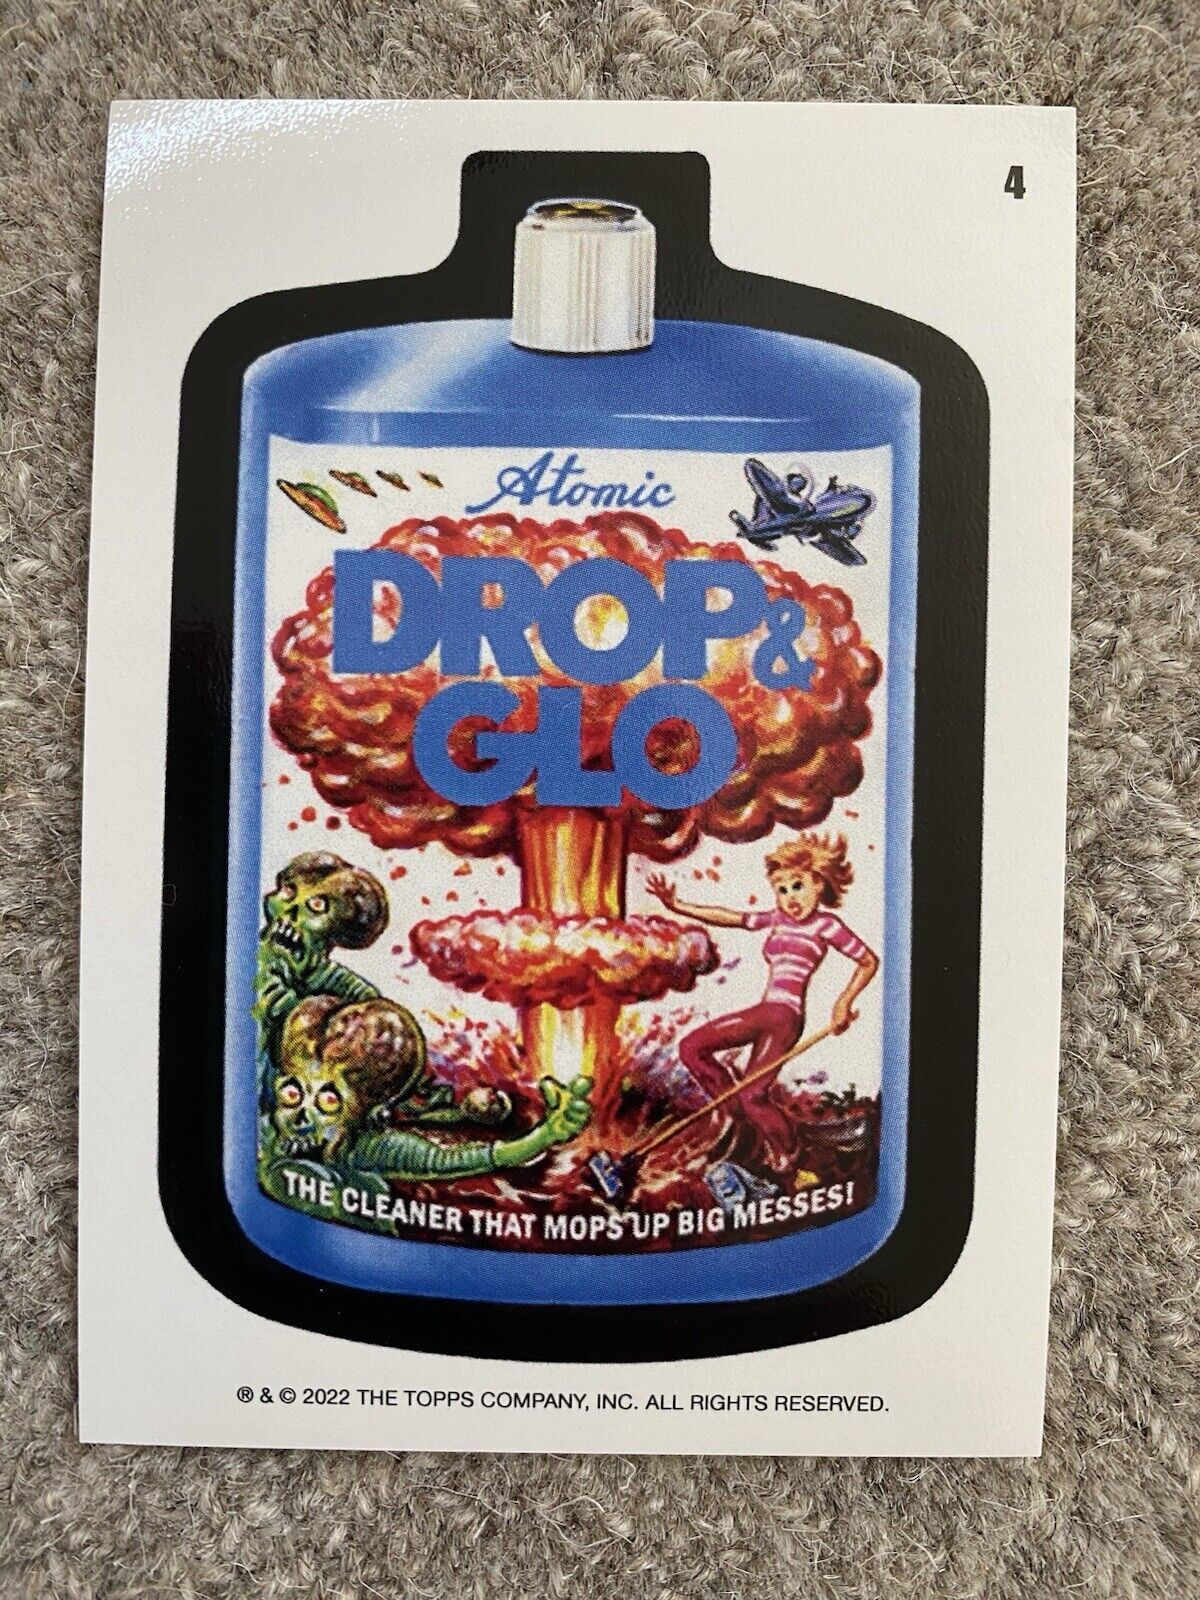 2022 TOPPS MARS ATTACKY WACKY PACKAGES SERIES 6 DROP & GLO COUPON CARD 4